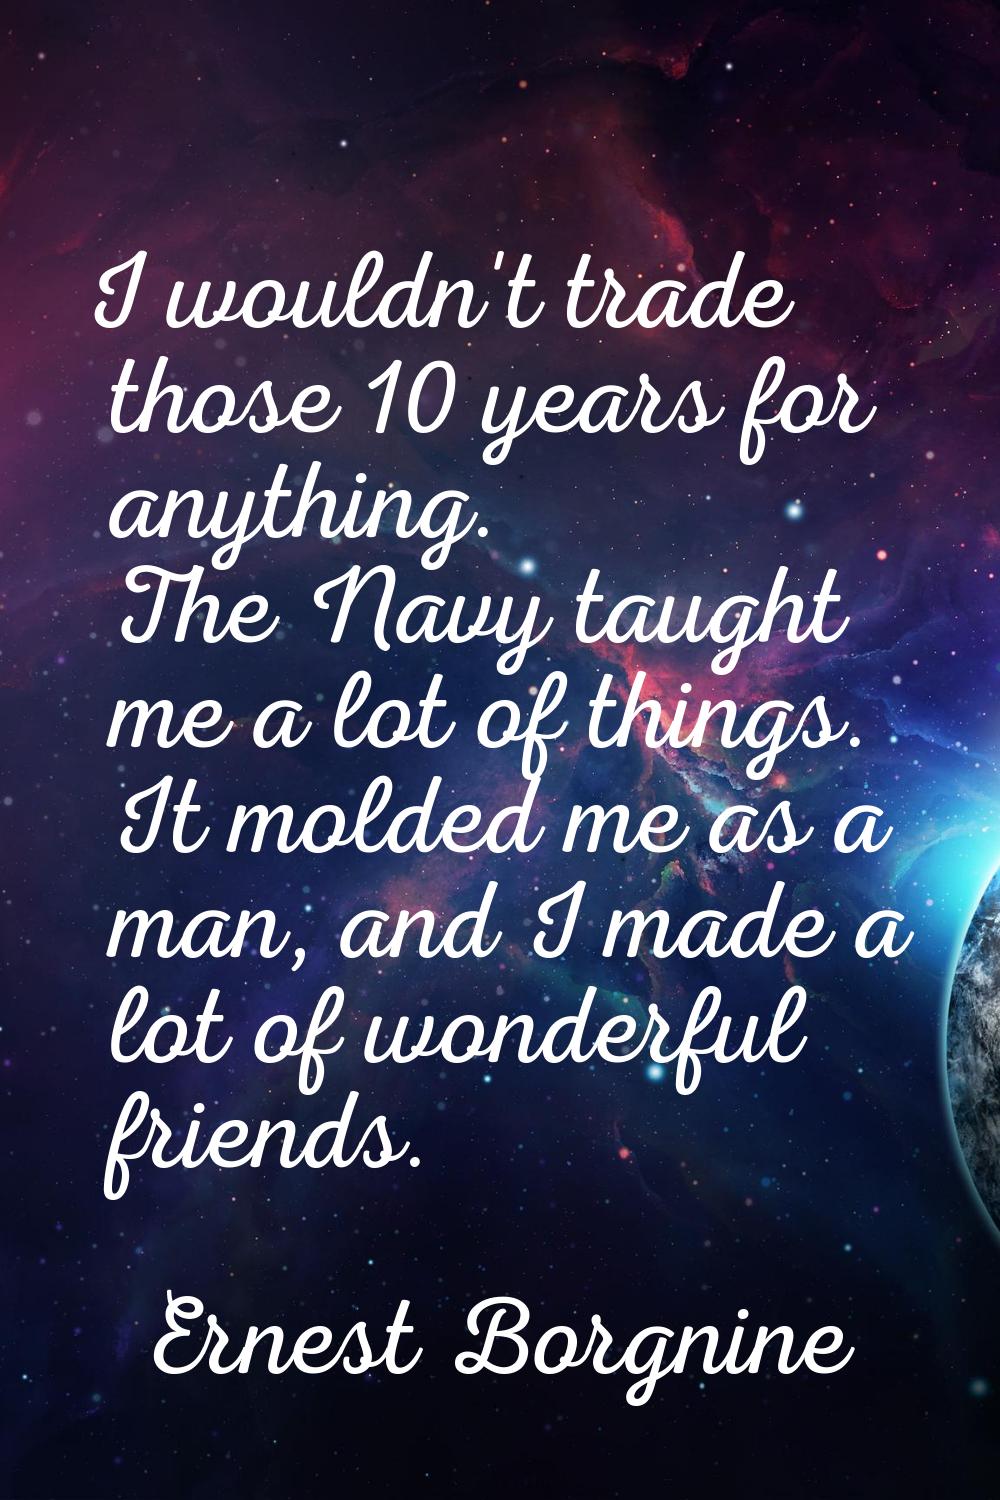 I wouldn't trade those 10 years for anything. The Navy taught me a lot of things. It molded me as a